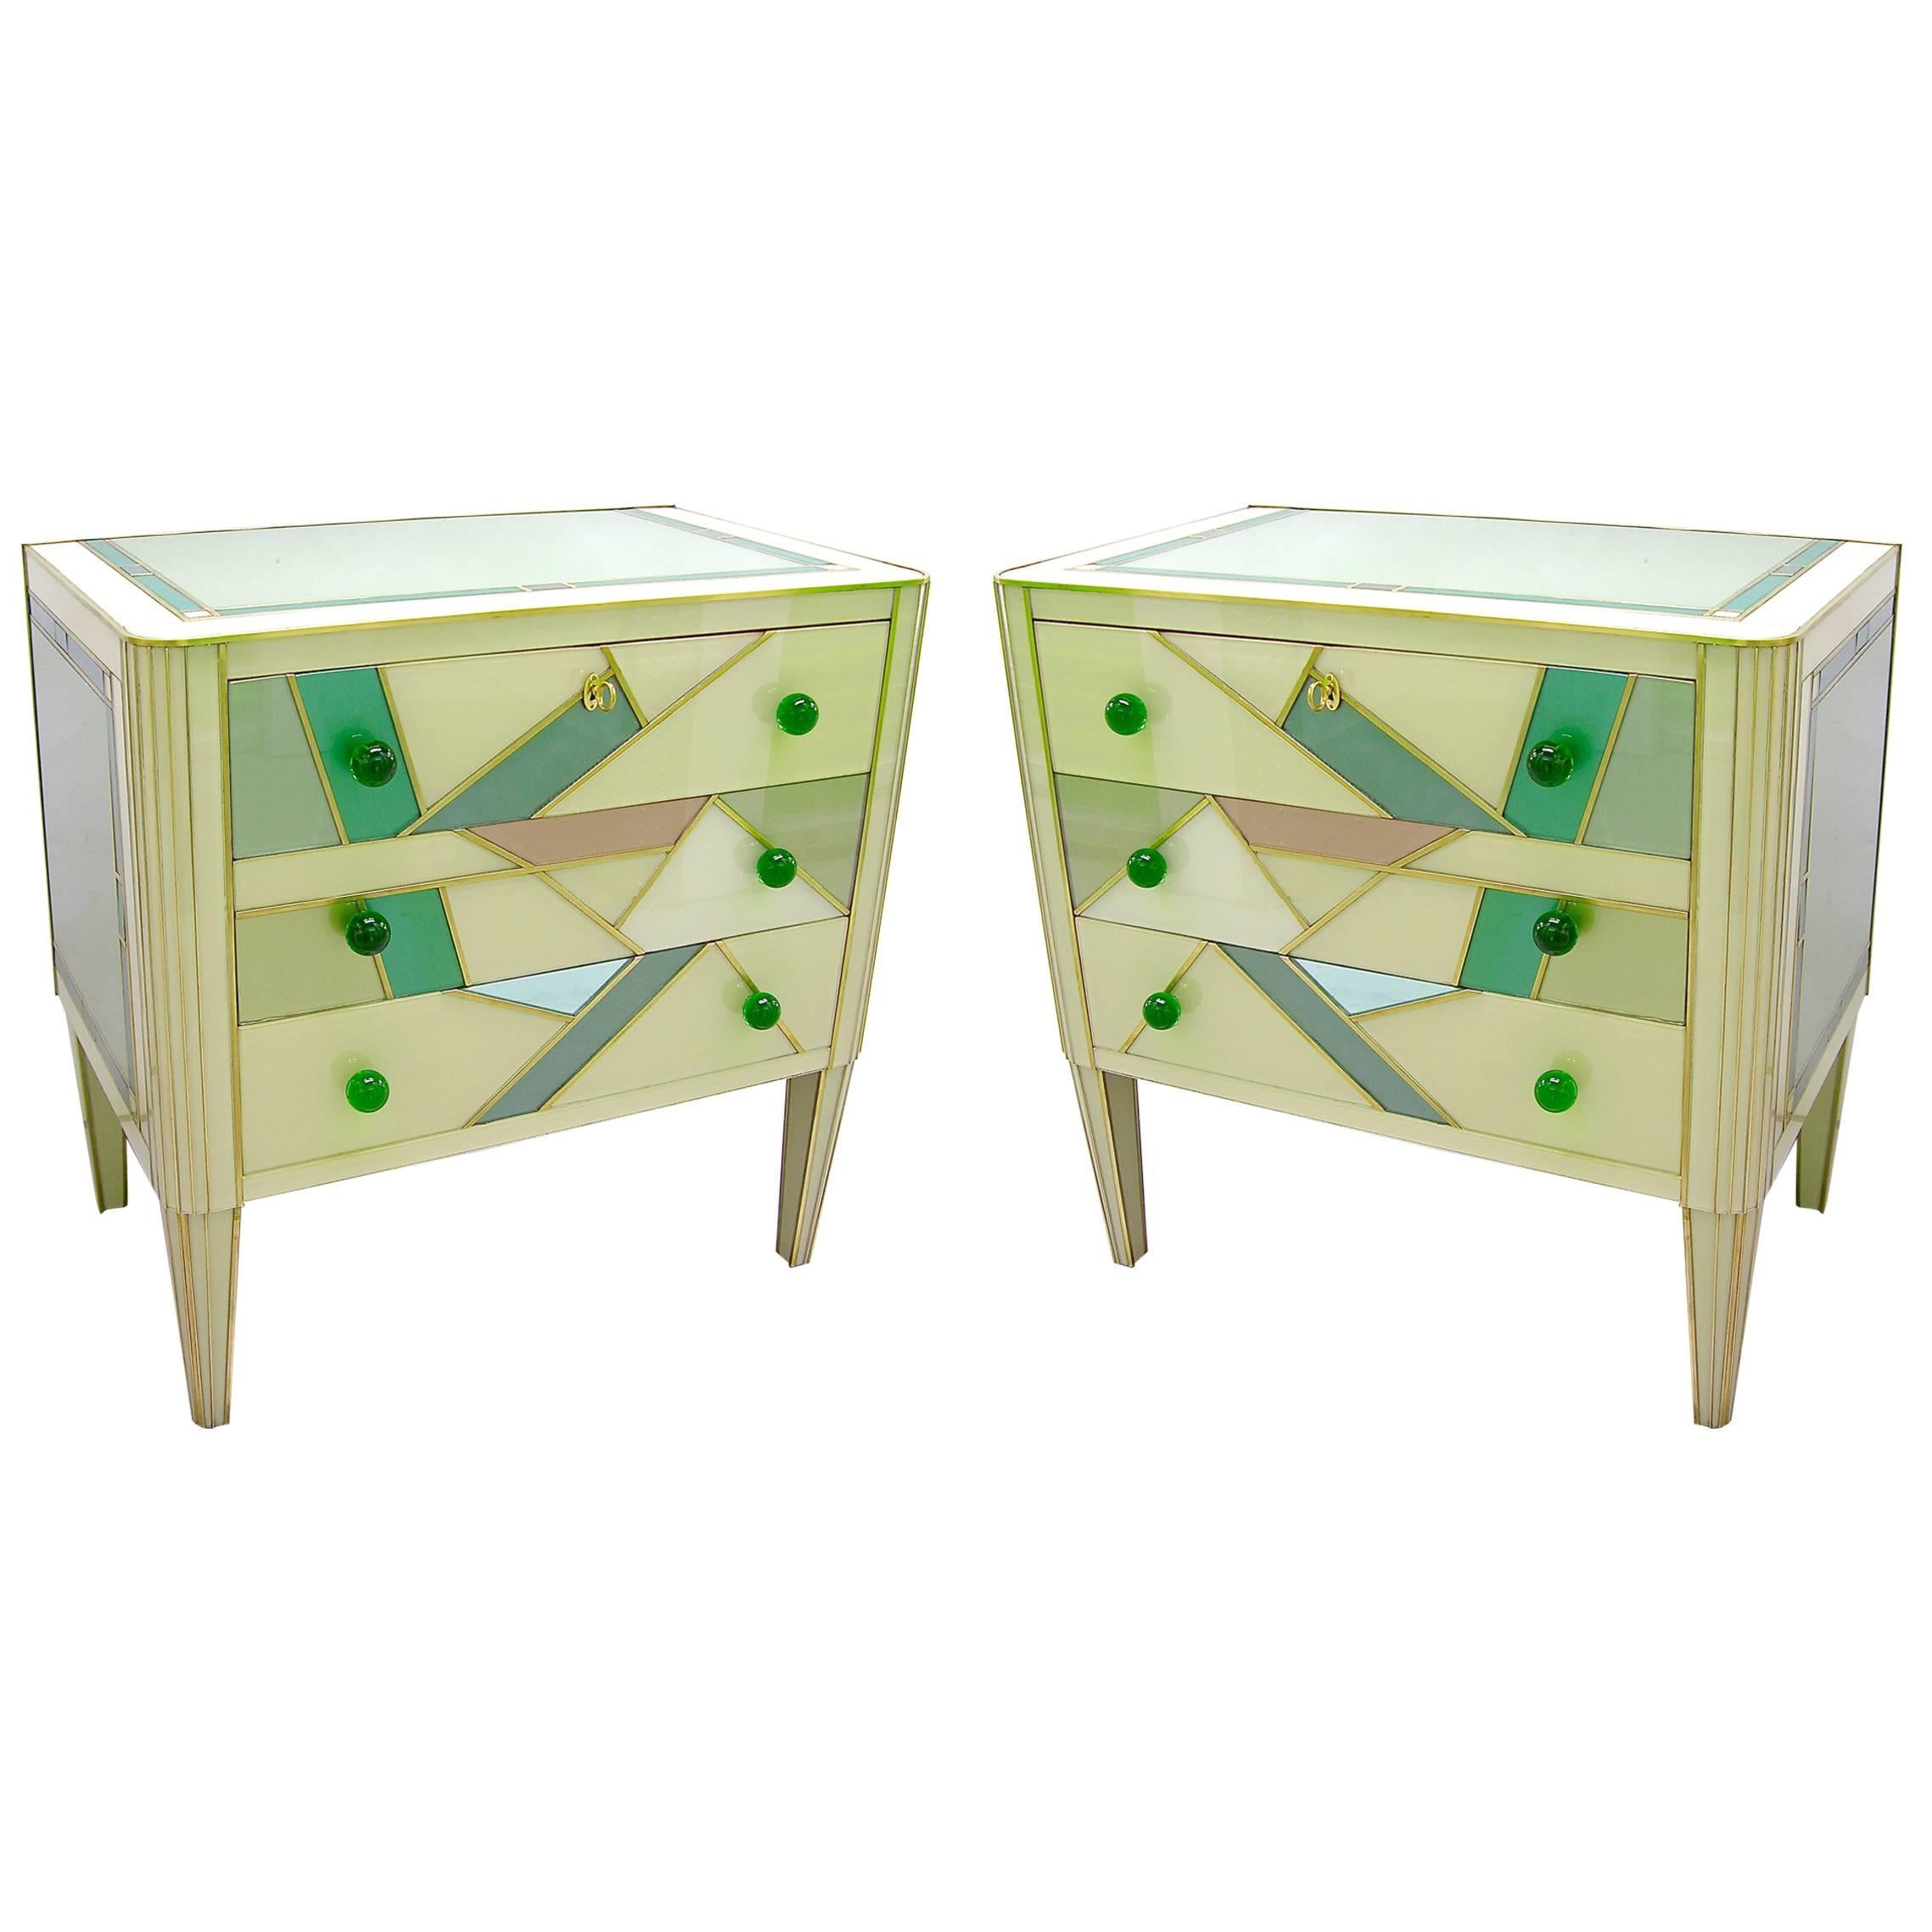 Italian Design Pair of Glass Abstract Decor Chests